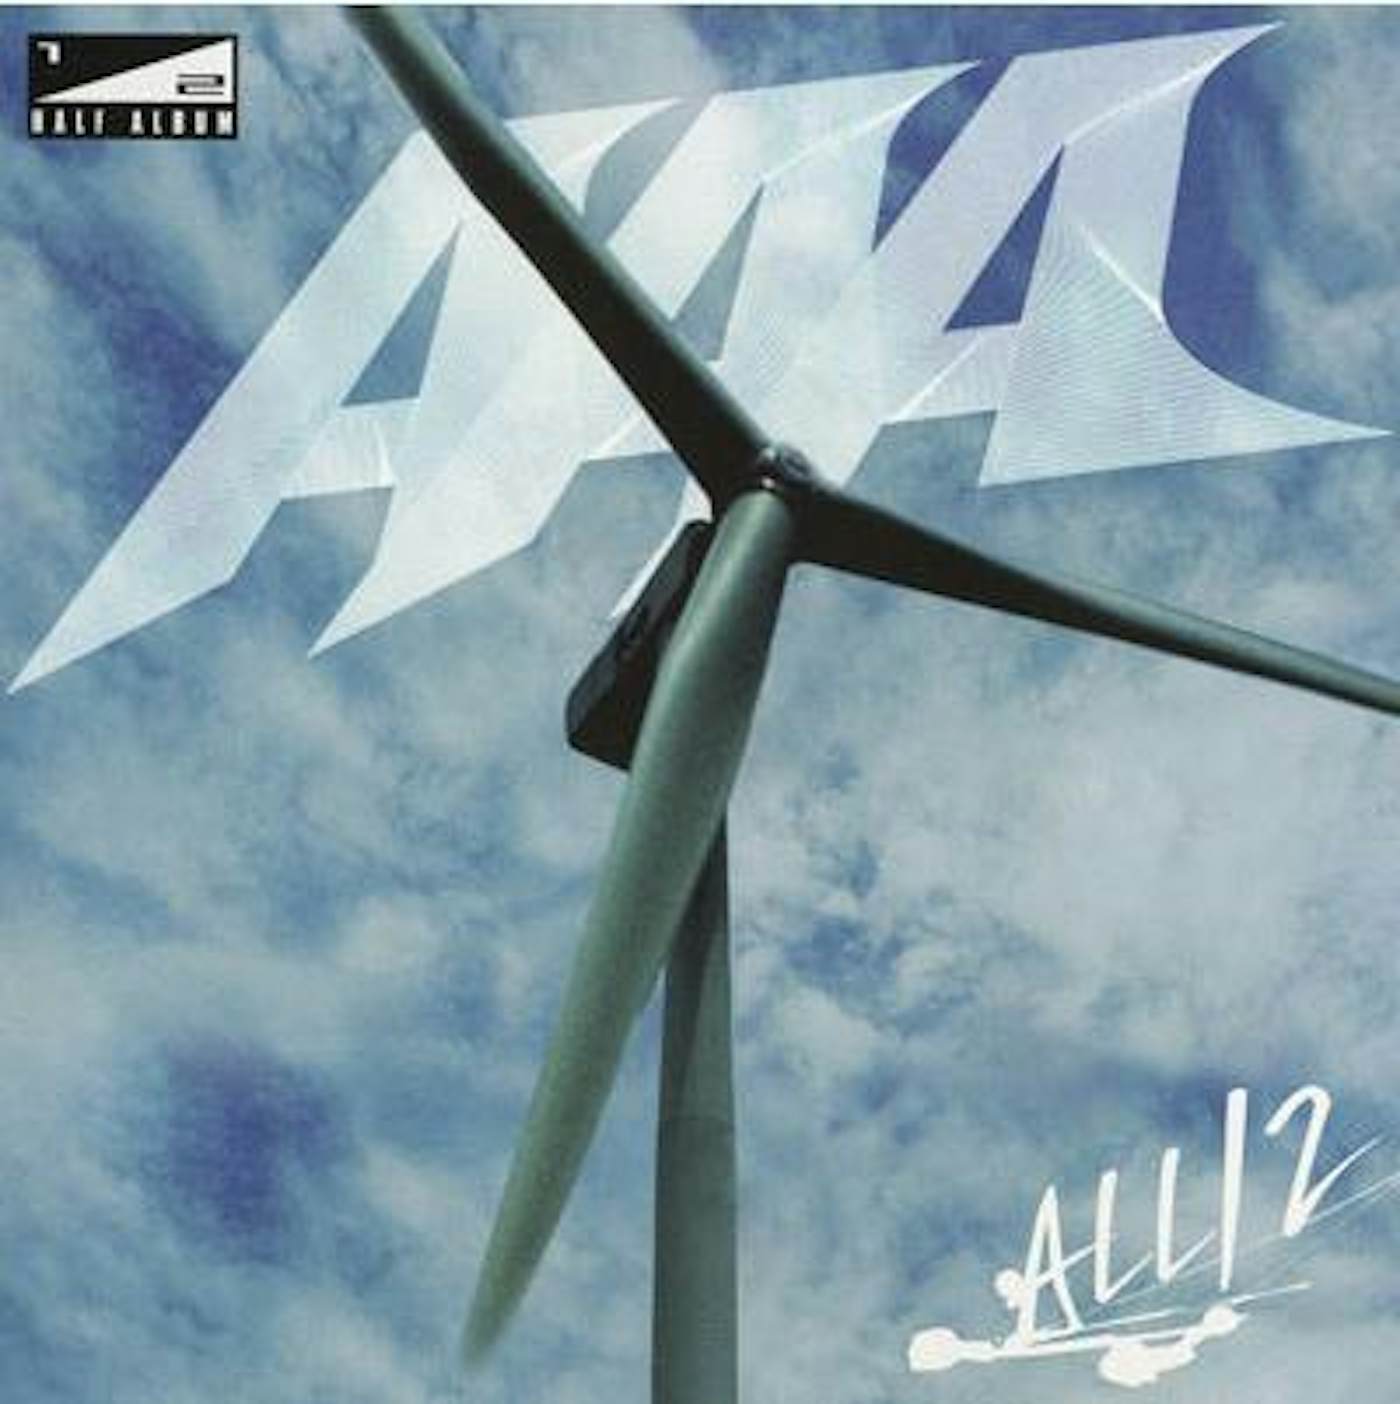 AAA ALL / 2 (LIMITED) CD